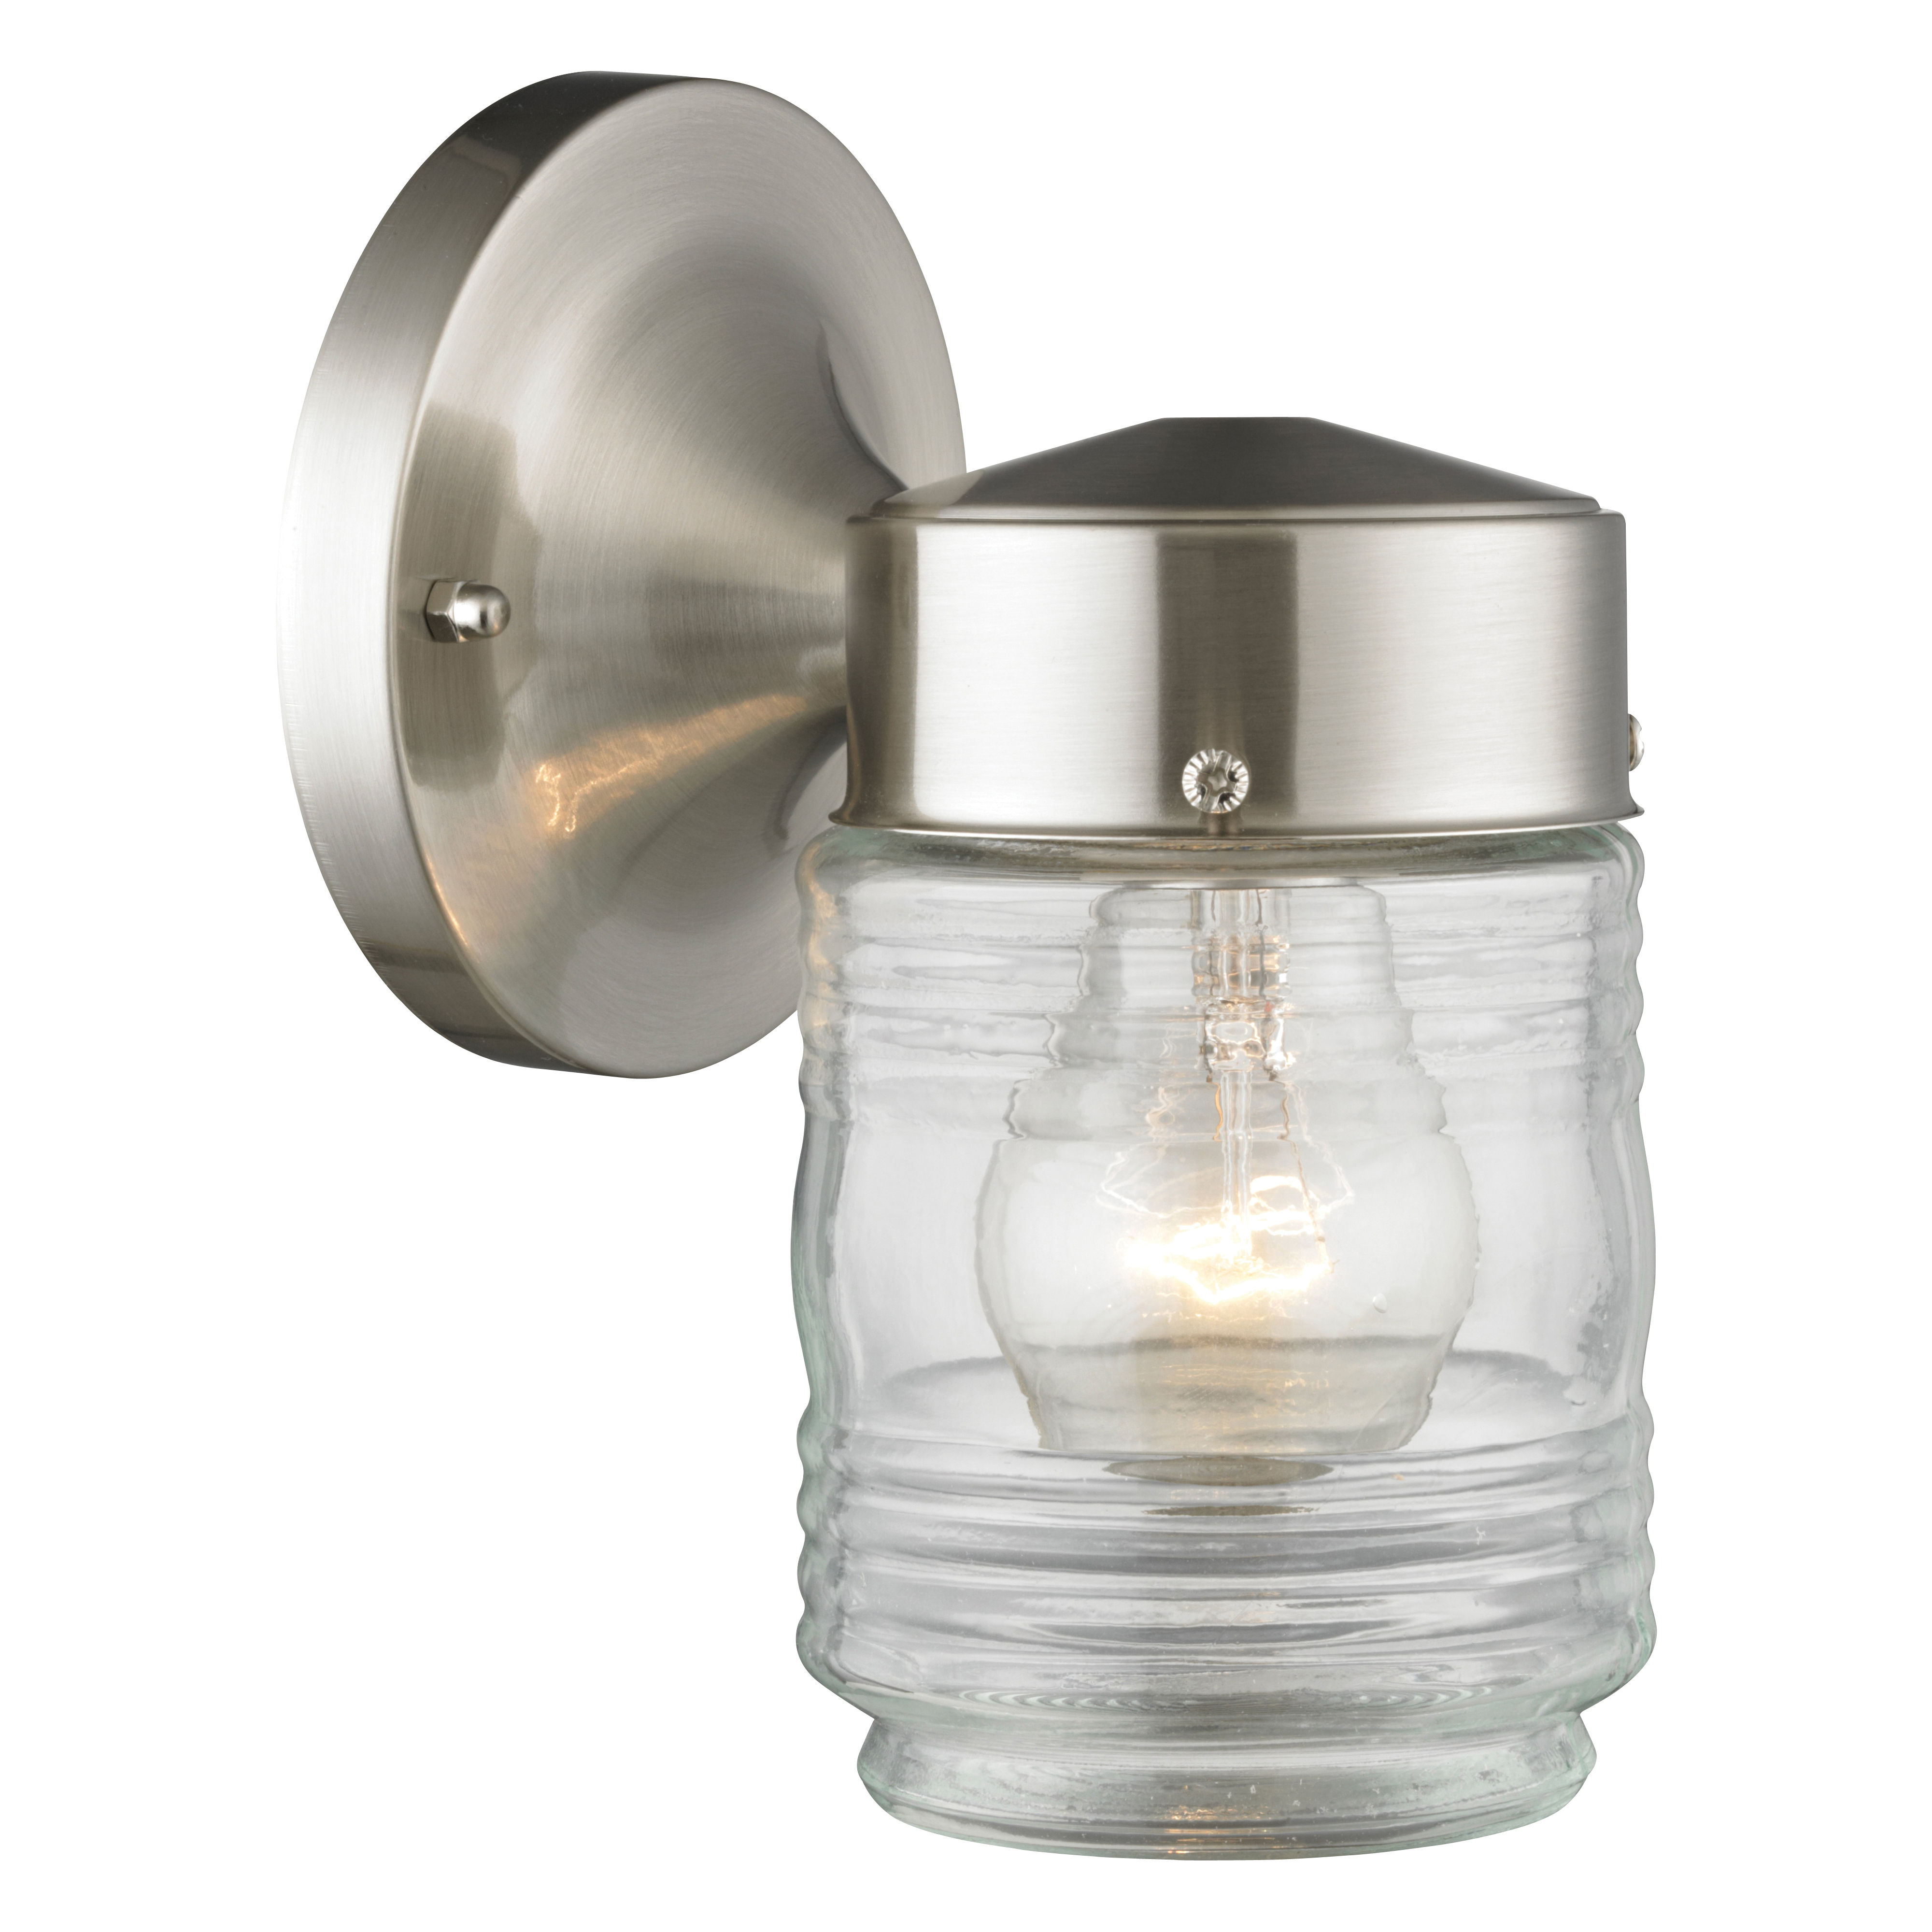 4402H-BN Outdoor Wall Lantern, 120 V, 60 W, A19 or CFL Lamp, Steel Fixture, Brushed Nickel